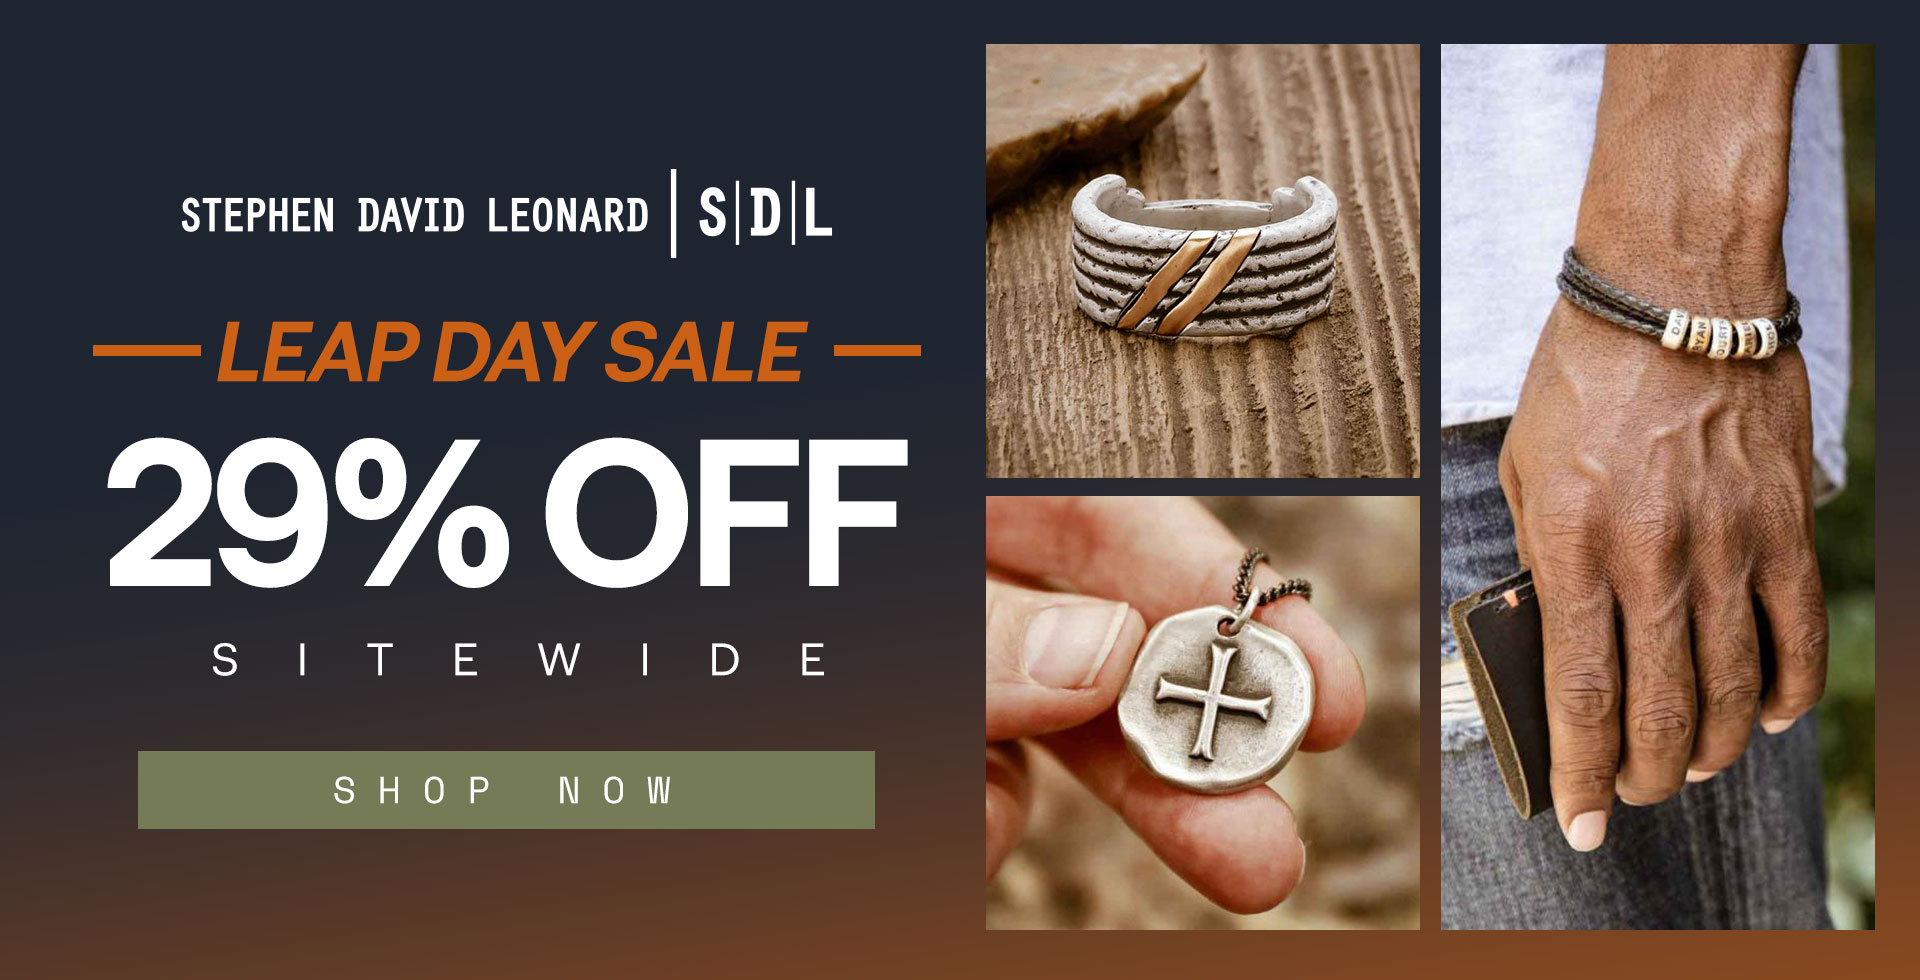 Leap Day Sale 29% Off Sitewide